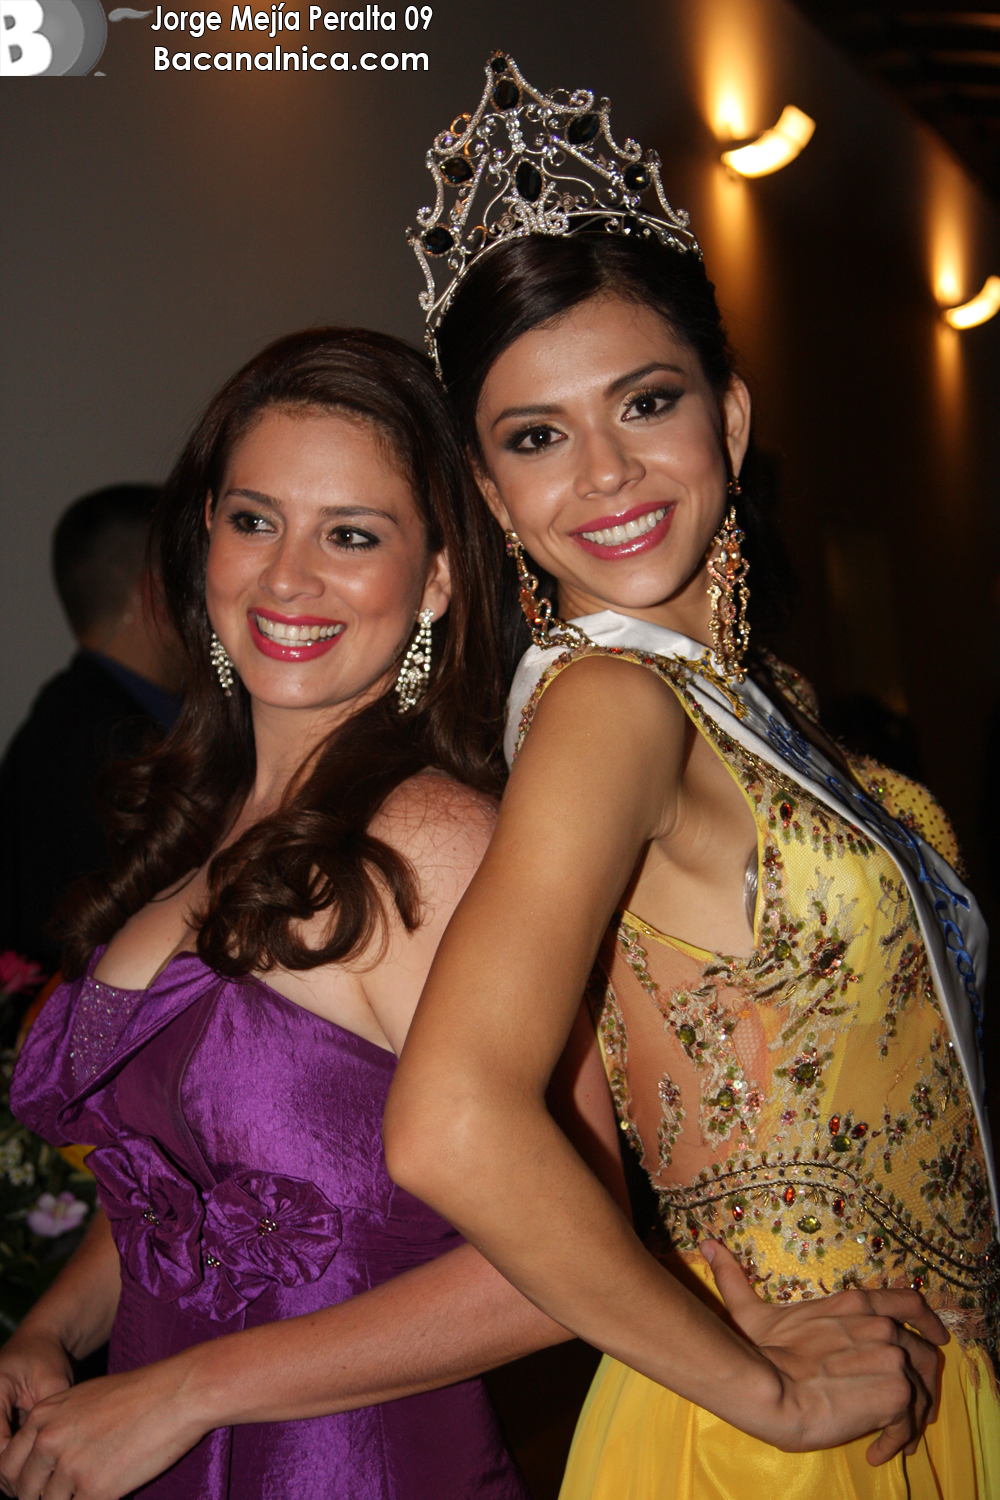 two beautiful young women dressed in gowns and tiaras